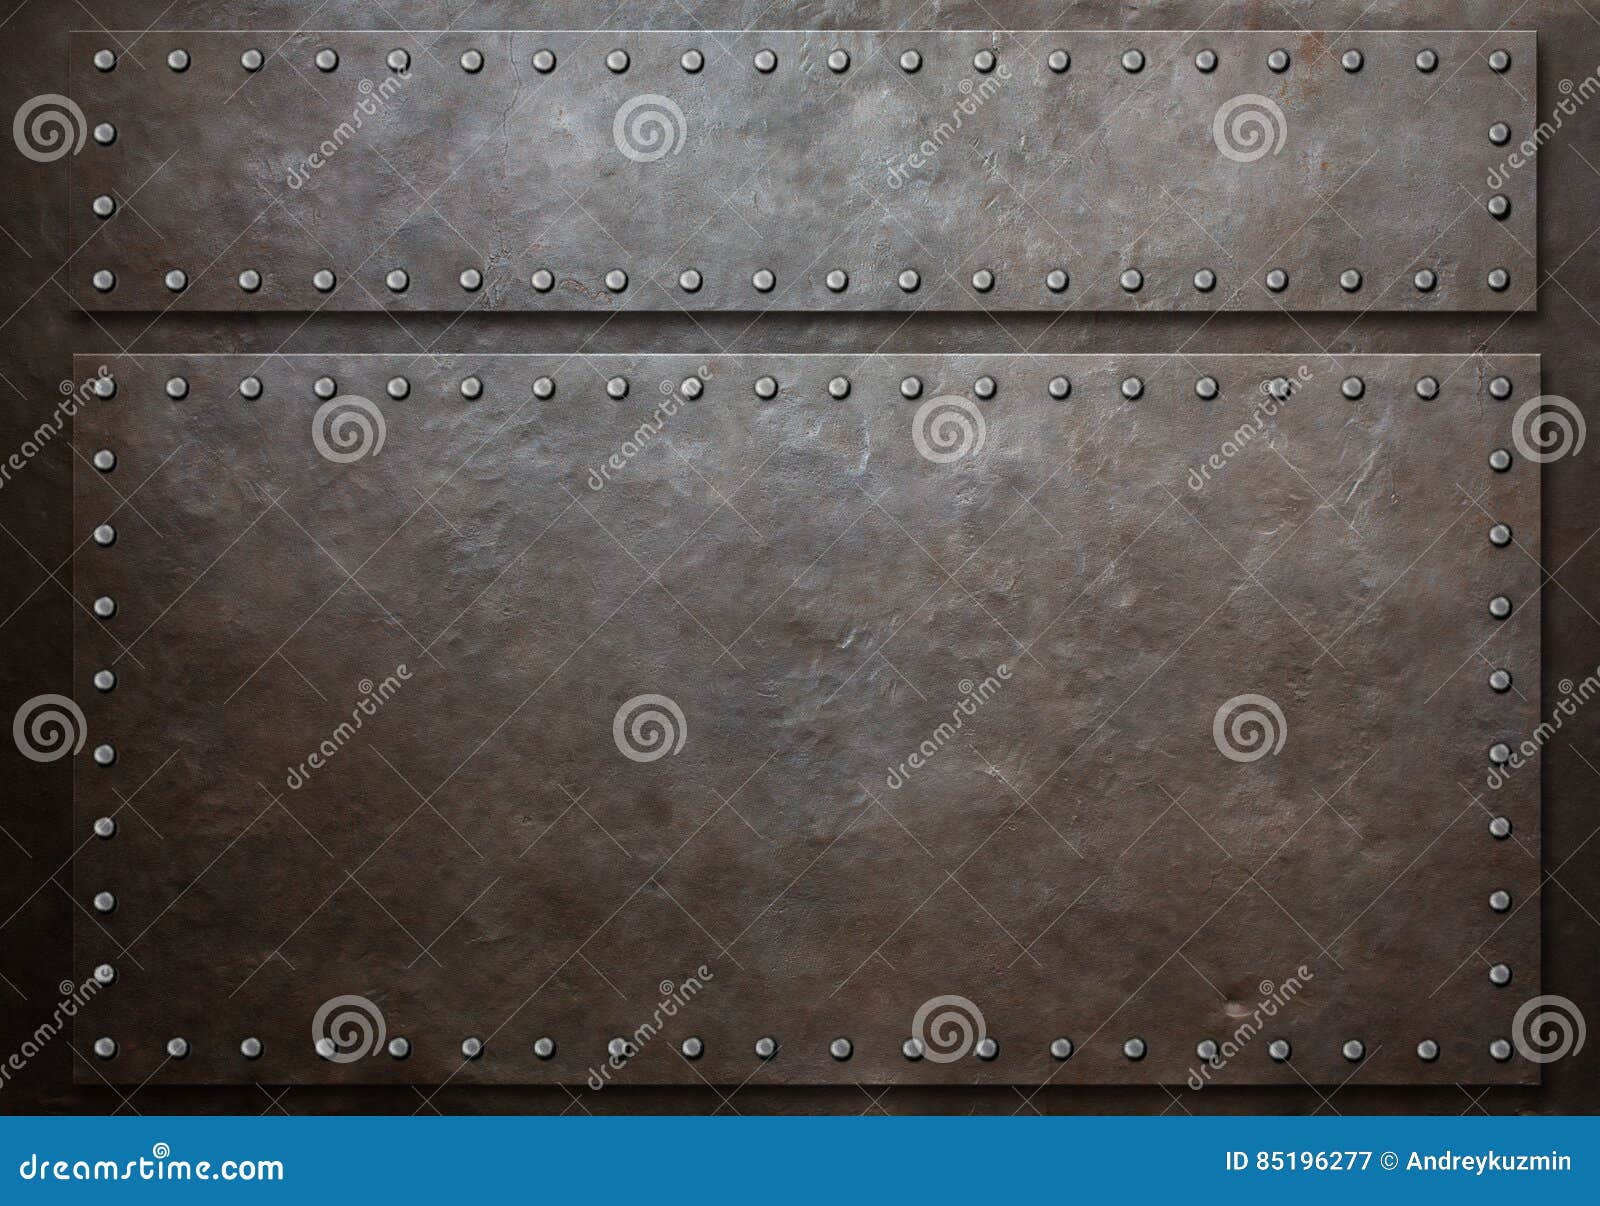 two stained steel plates with rivets over metal background